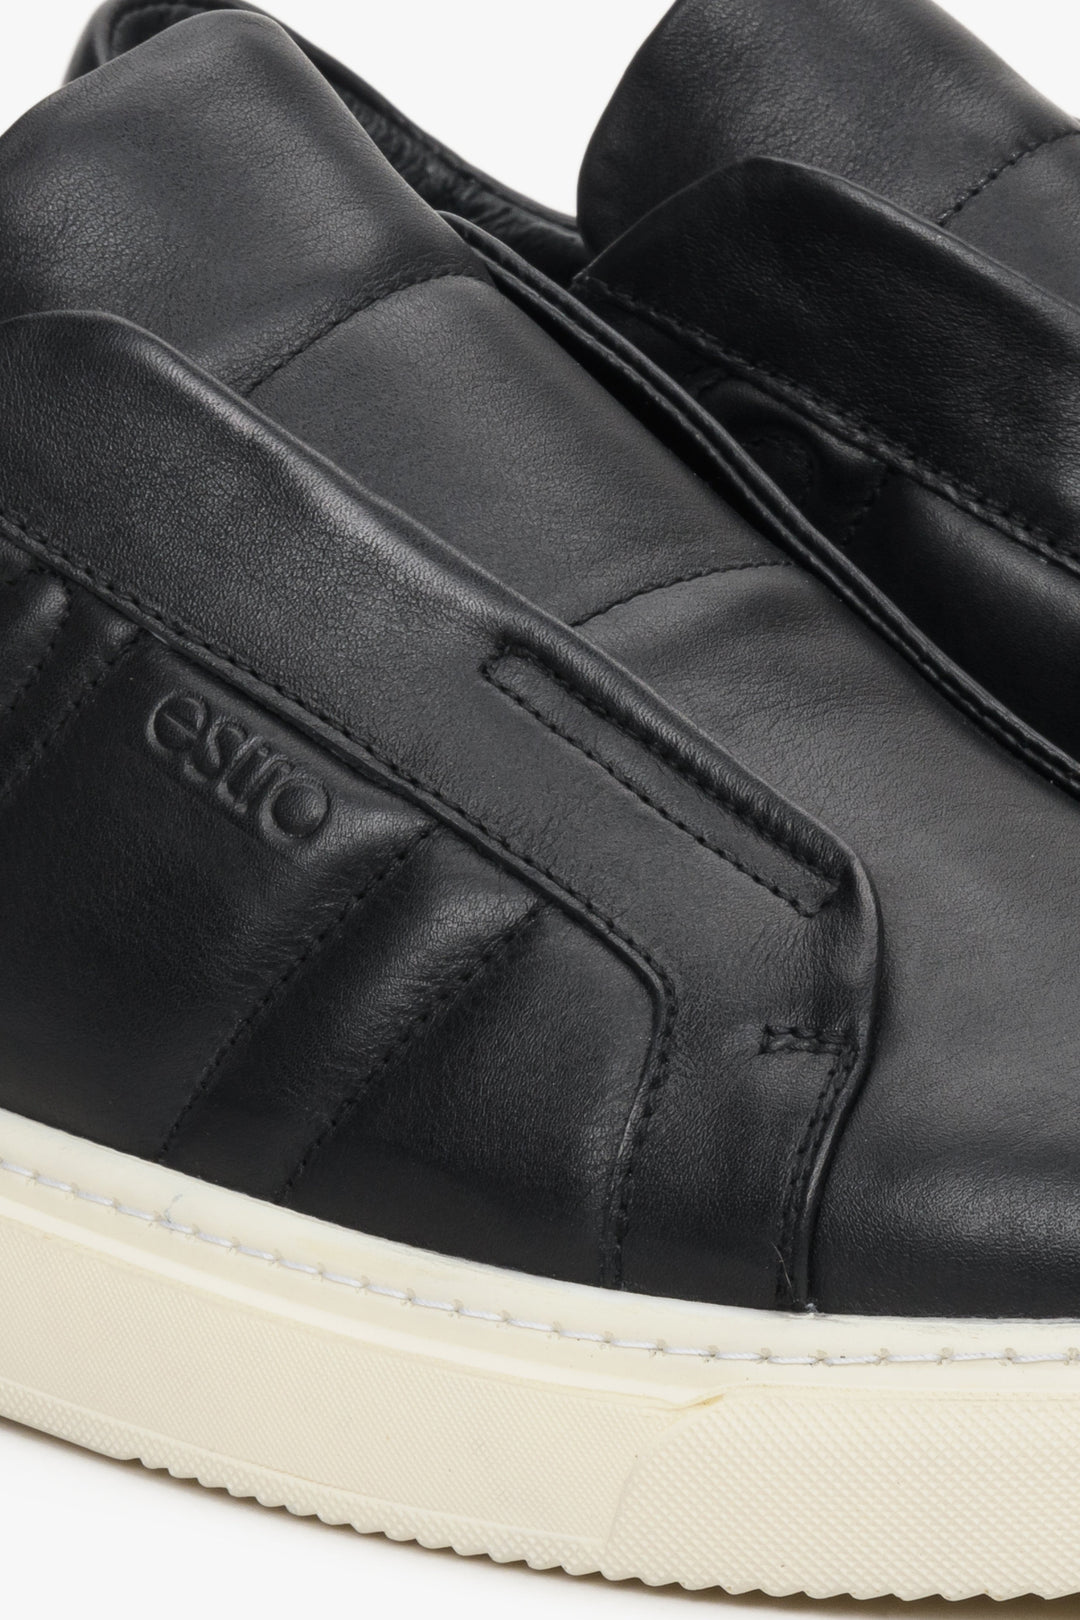 Men's black slip-on sneakers by Estro for spring and fall - close-up of the details.